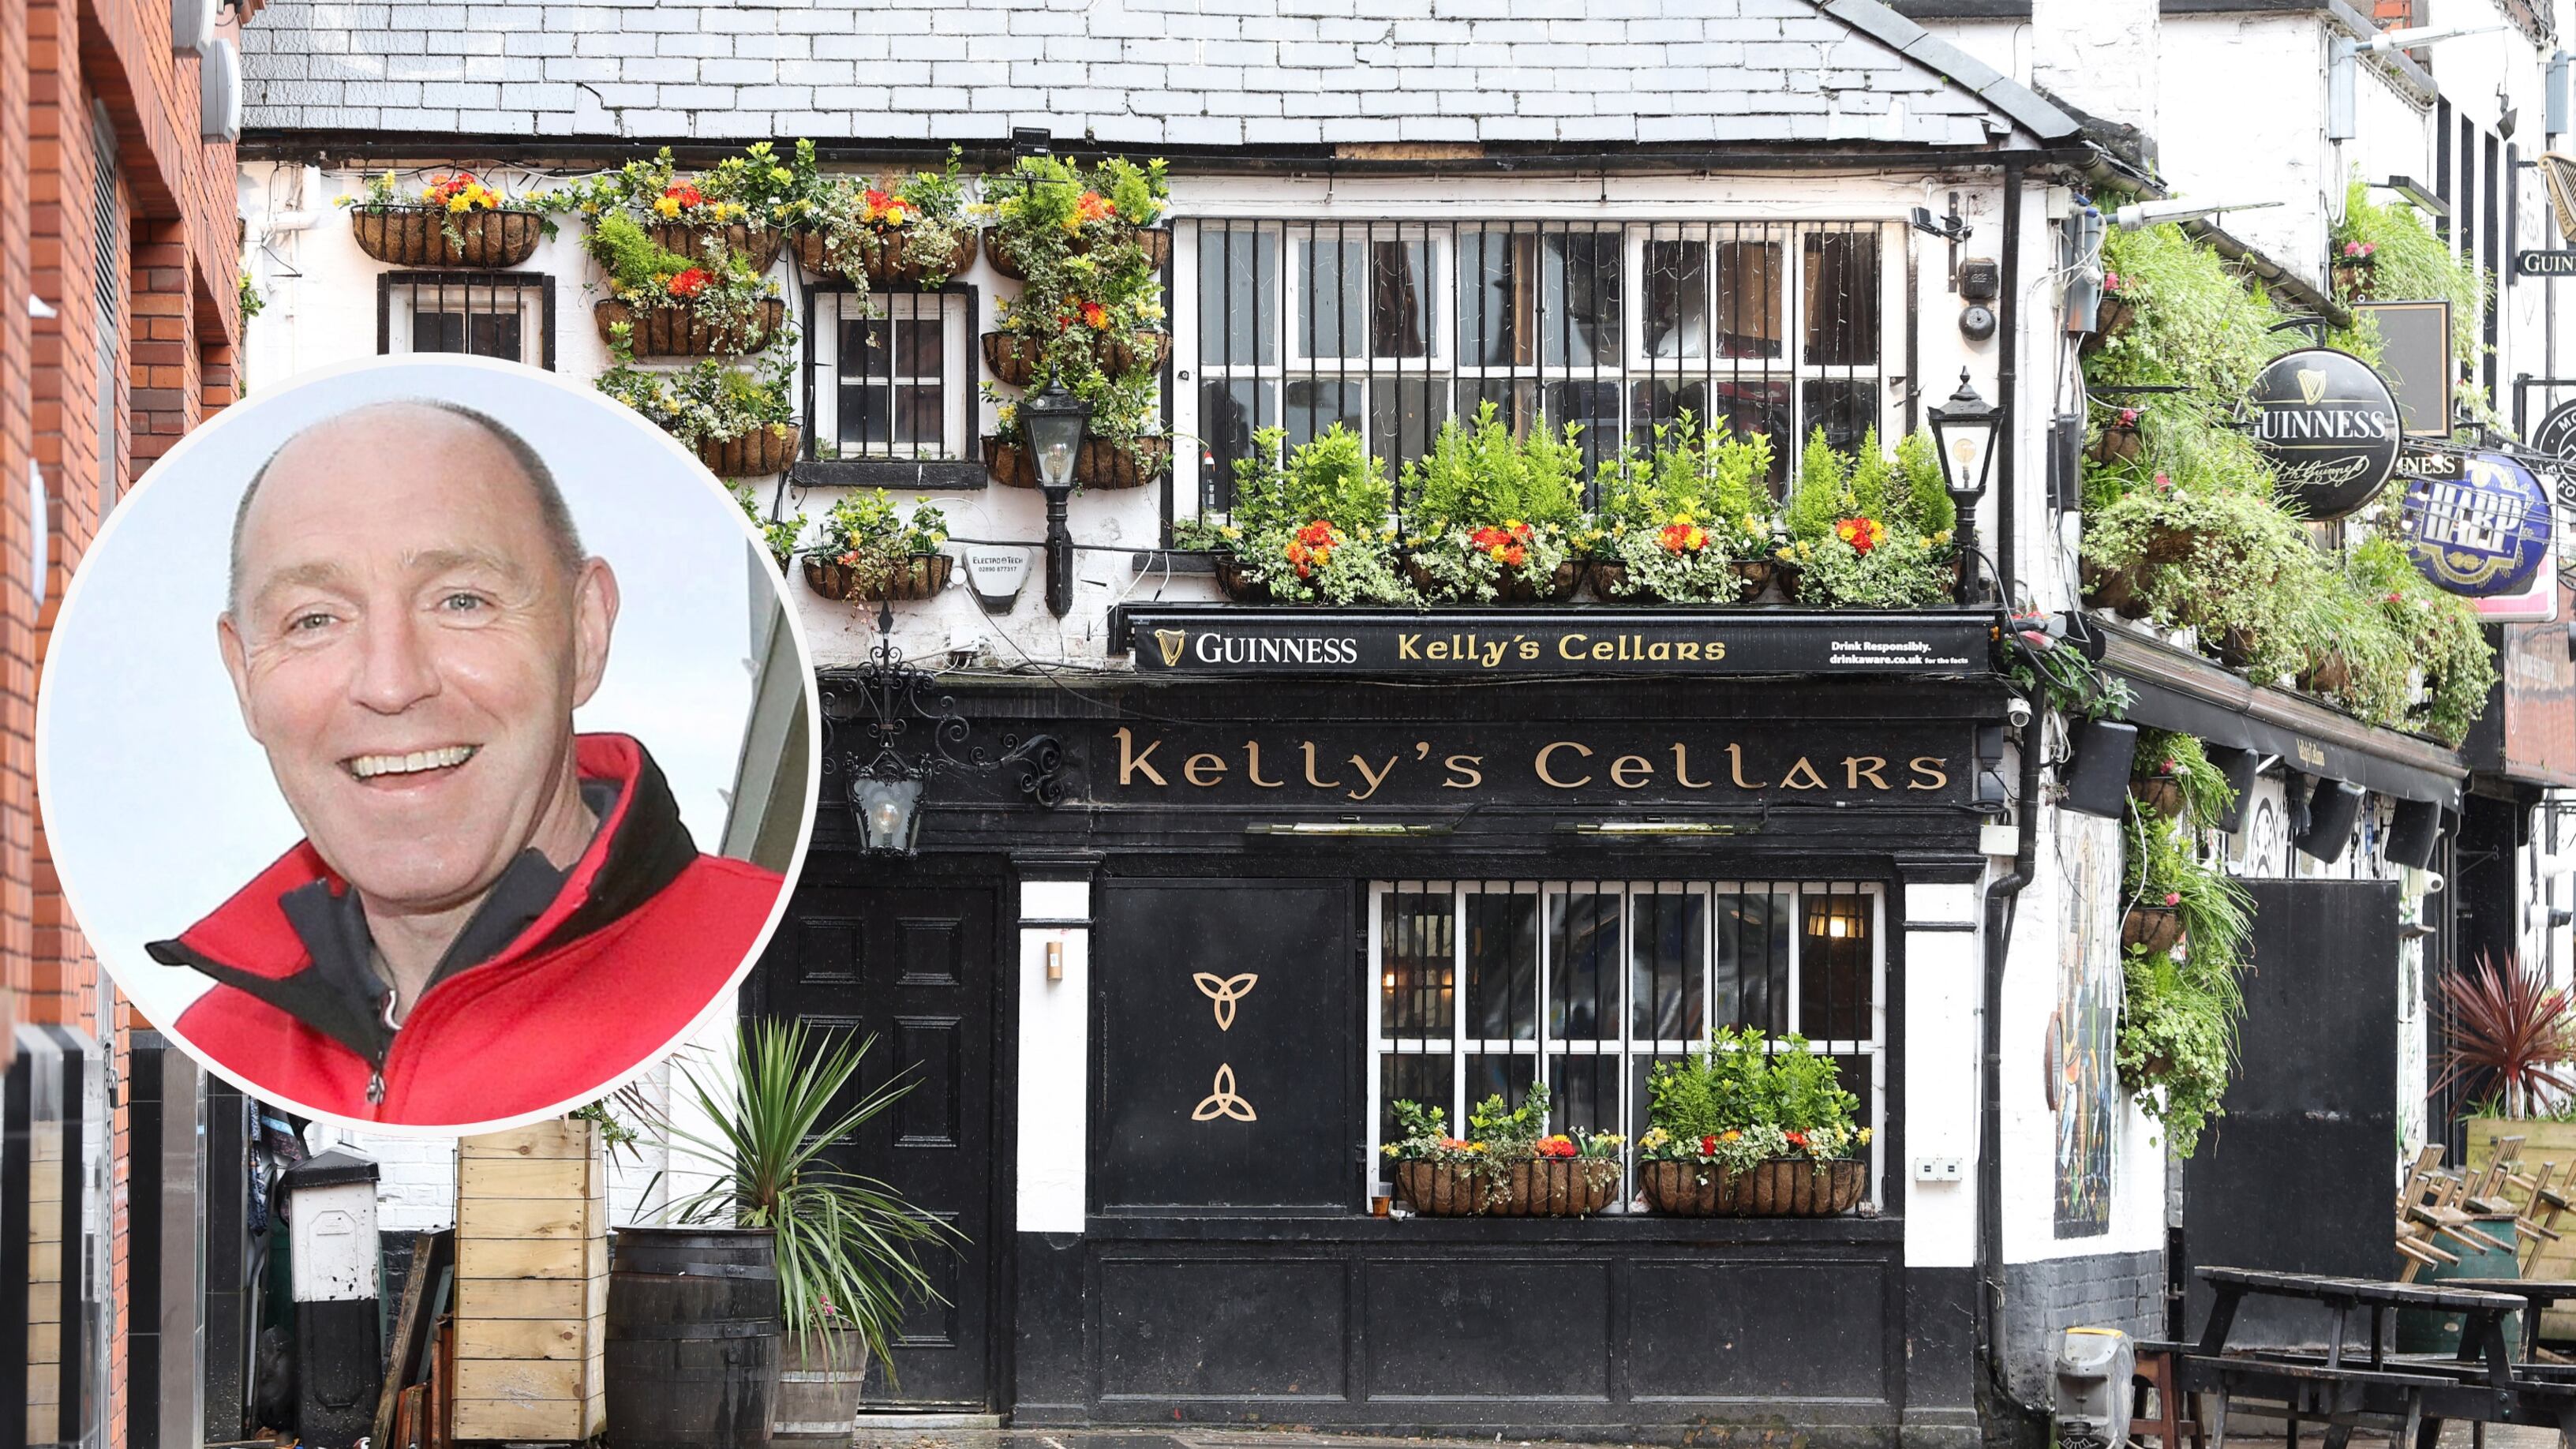 Exterior of Kelly's Cellars, with inset image of Henry Downey.